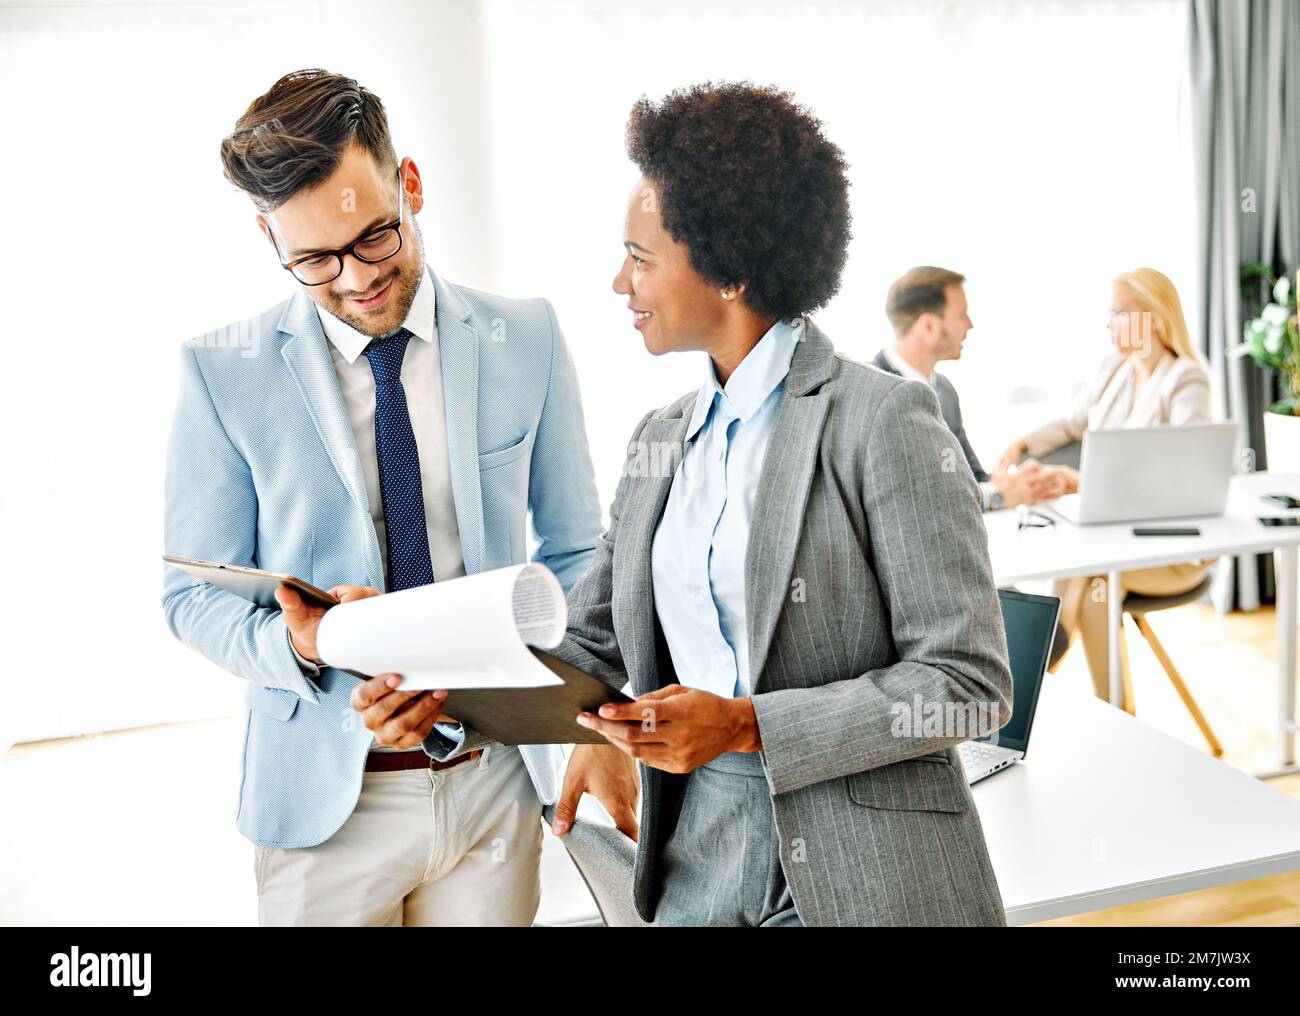 young business people meeting office teamwork group success corporate discussion tablet document Stock Photo